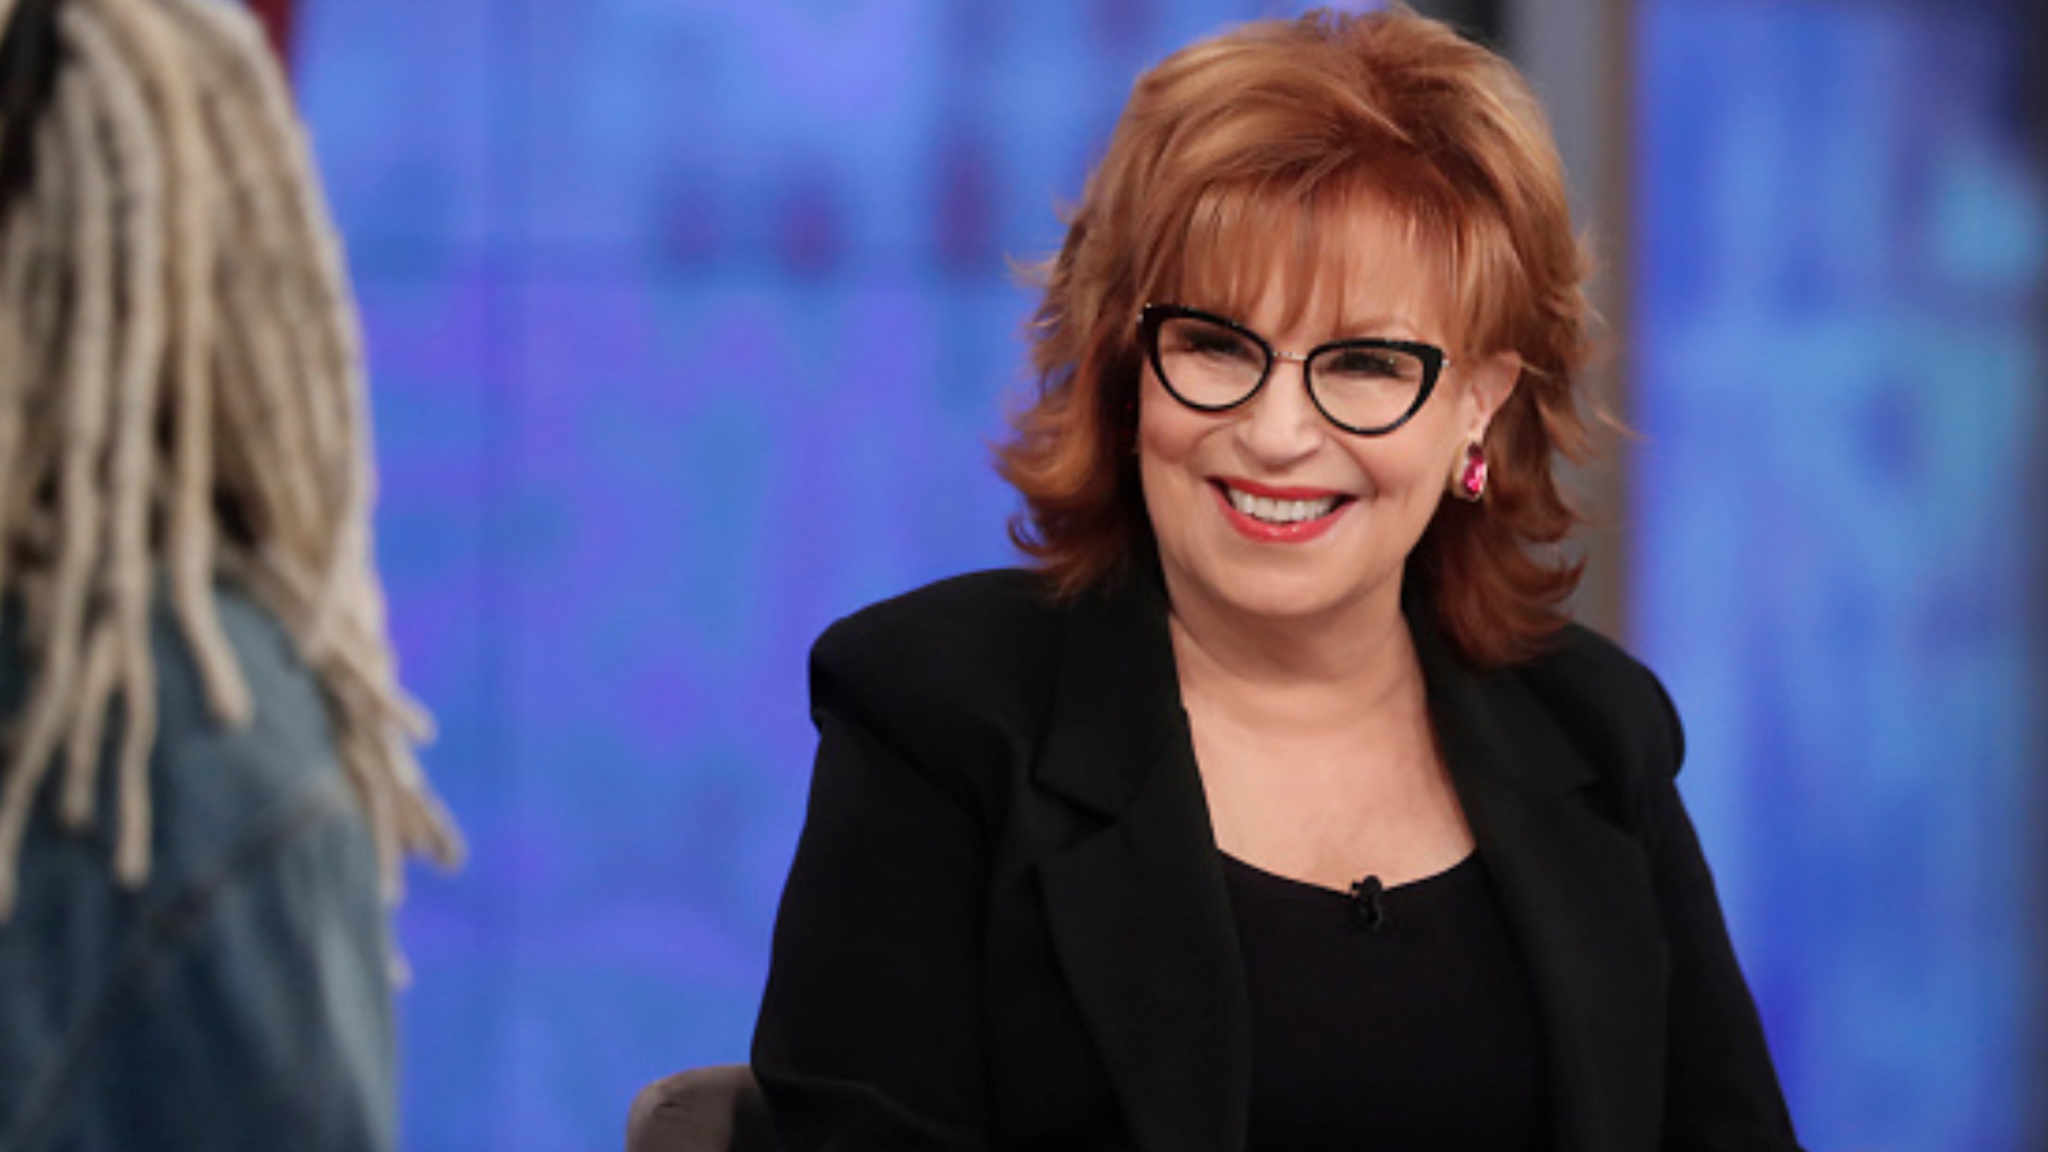 THE VIEW - 9/30/19 Michael Strahan, Sara Haines and Keke Palmer ("GMA3: Strahan, Sara and Keke") and Allison Tolman ("Emergence") are the guests today on ABC "The View." "The View" airs Monday-Friday 11am-12 noon, ET on ABC. VW19